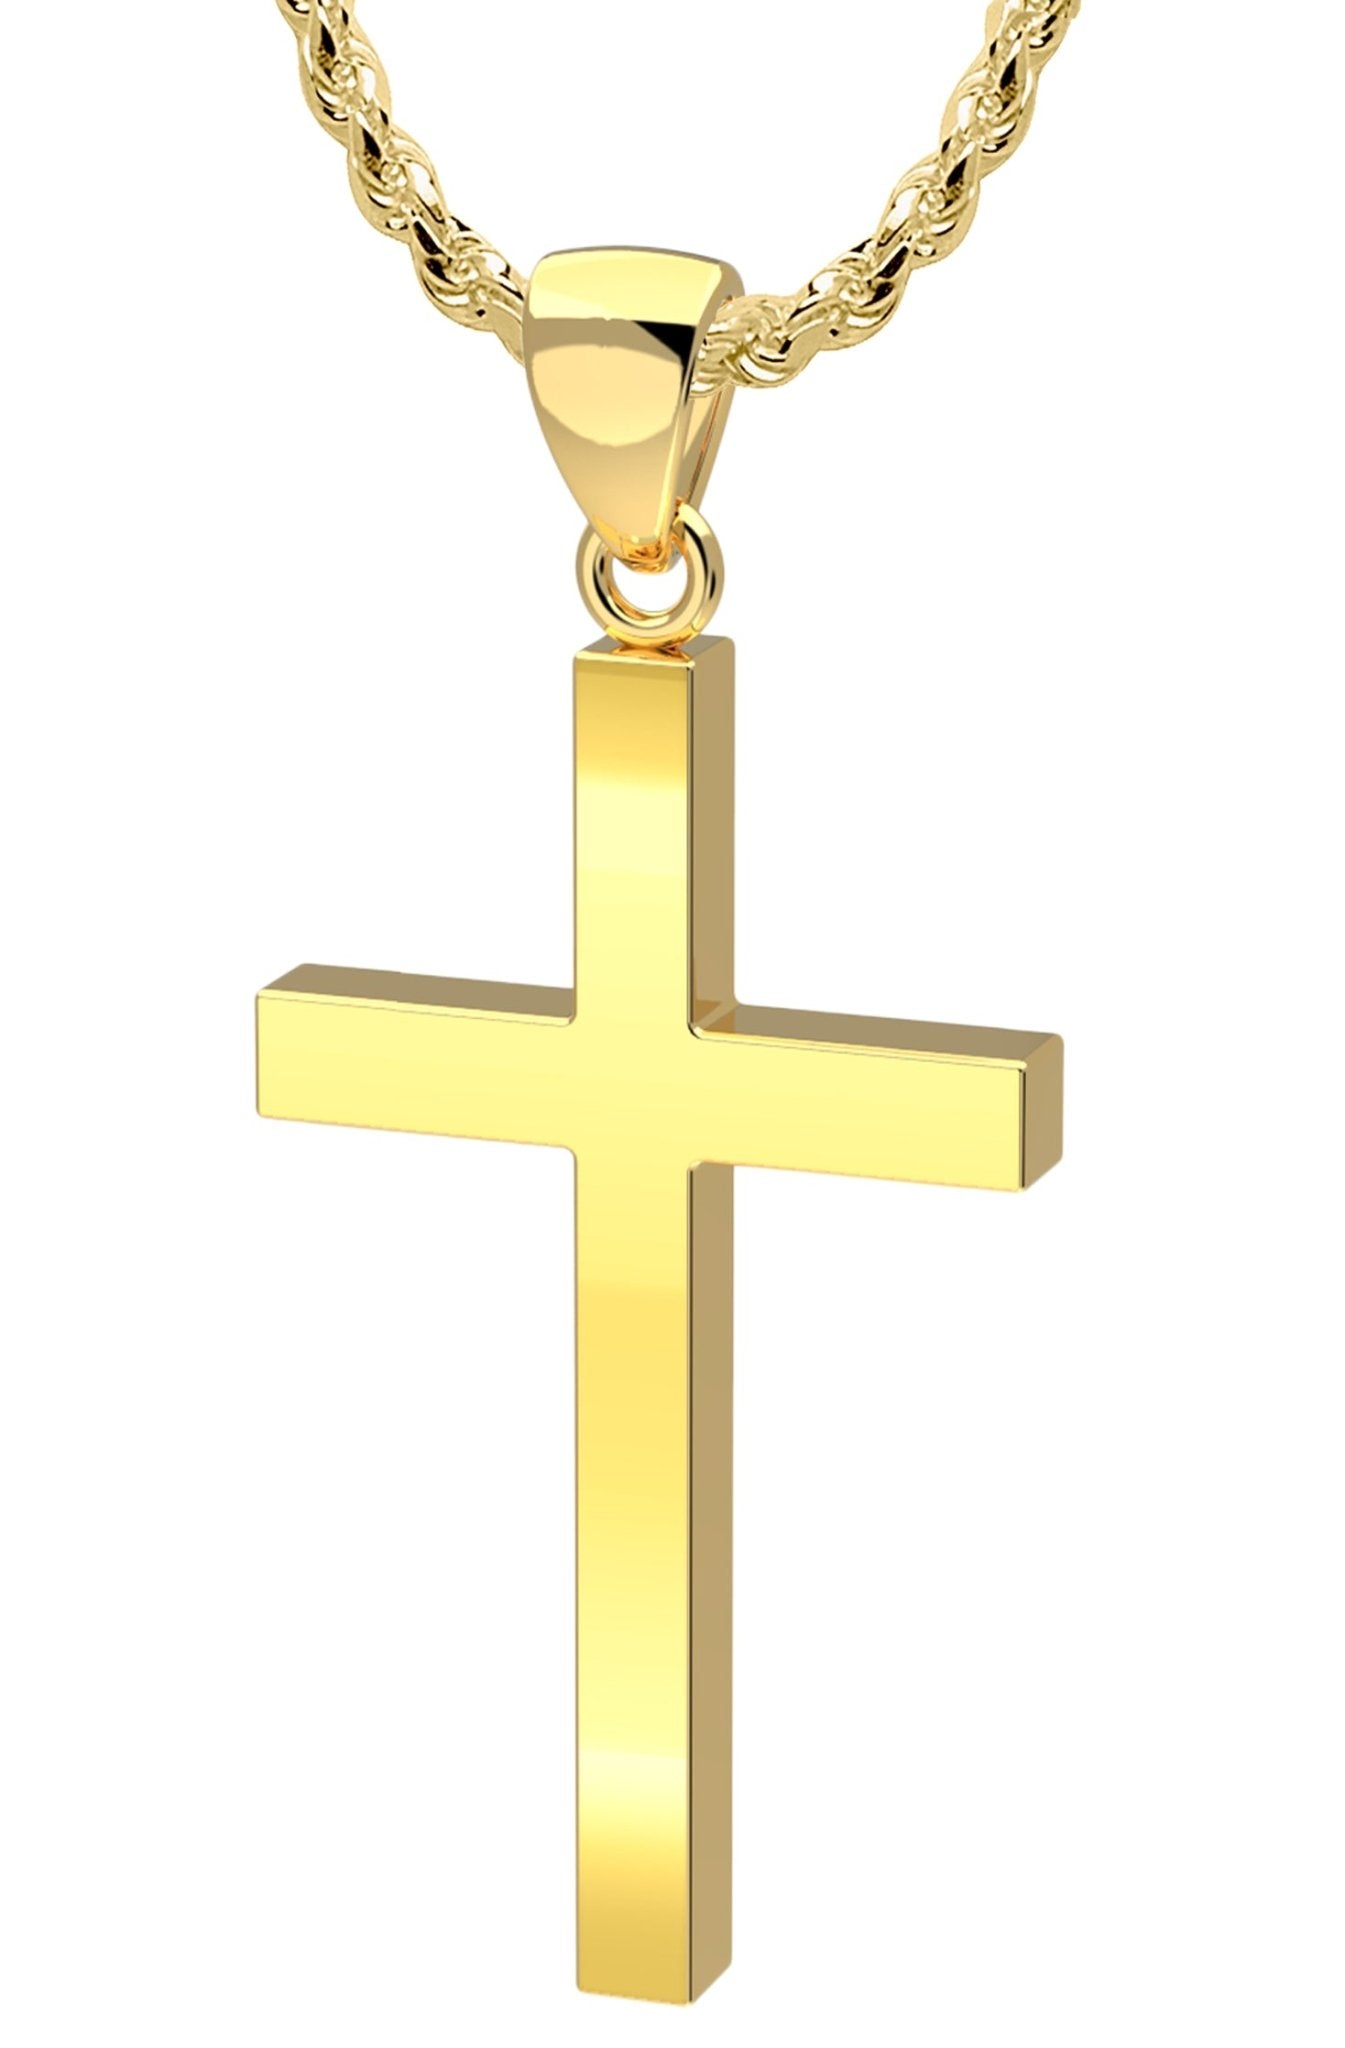 Cross Necklace Charm in 14K Gold | Zales